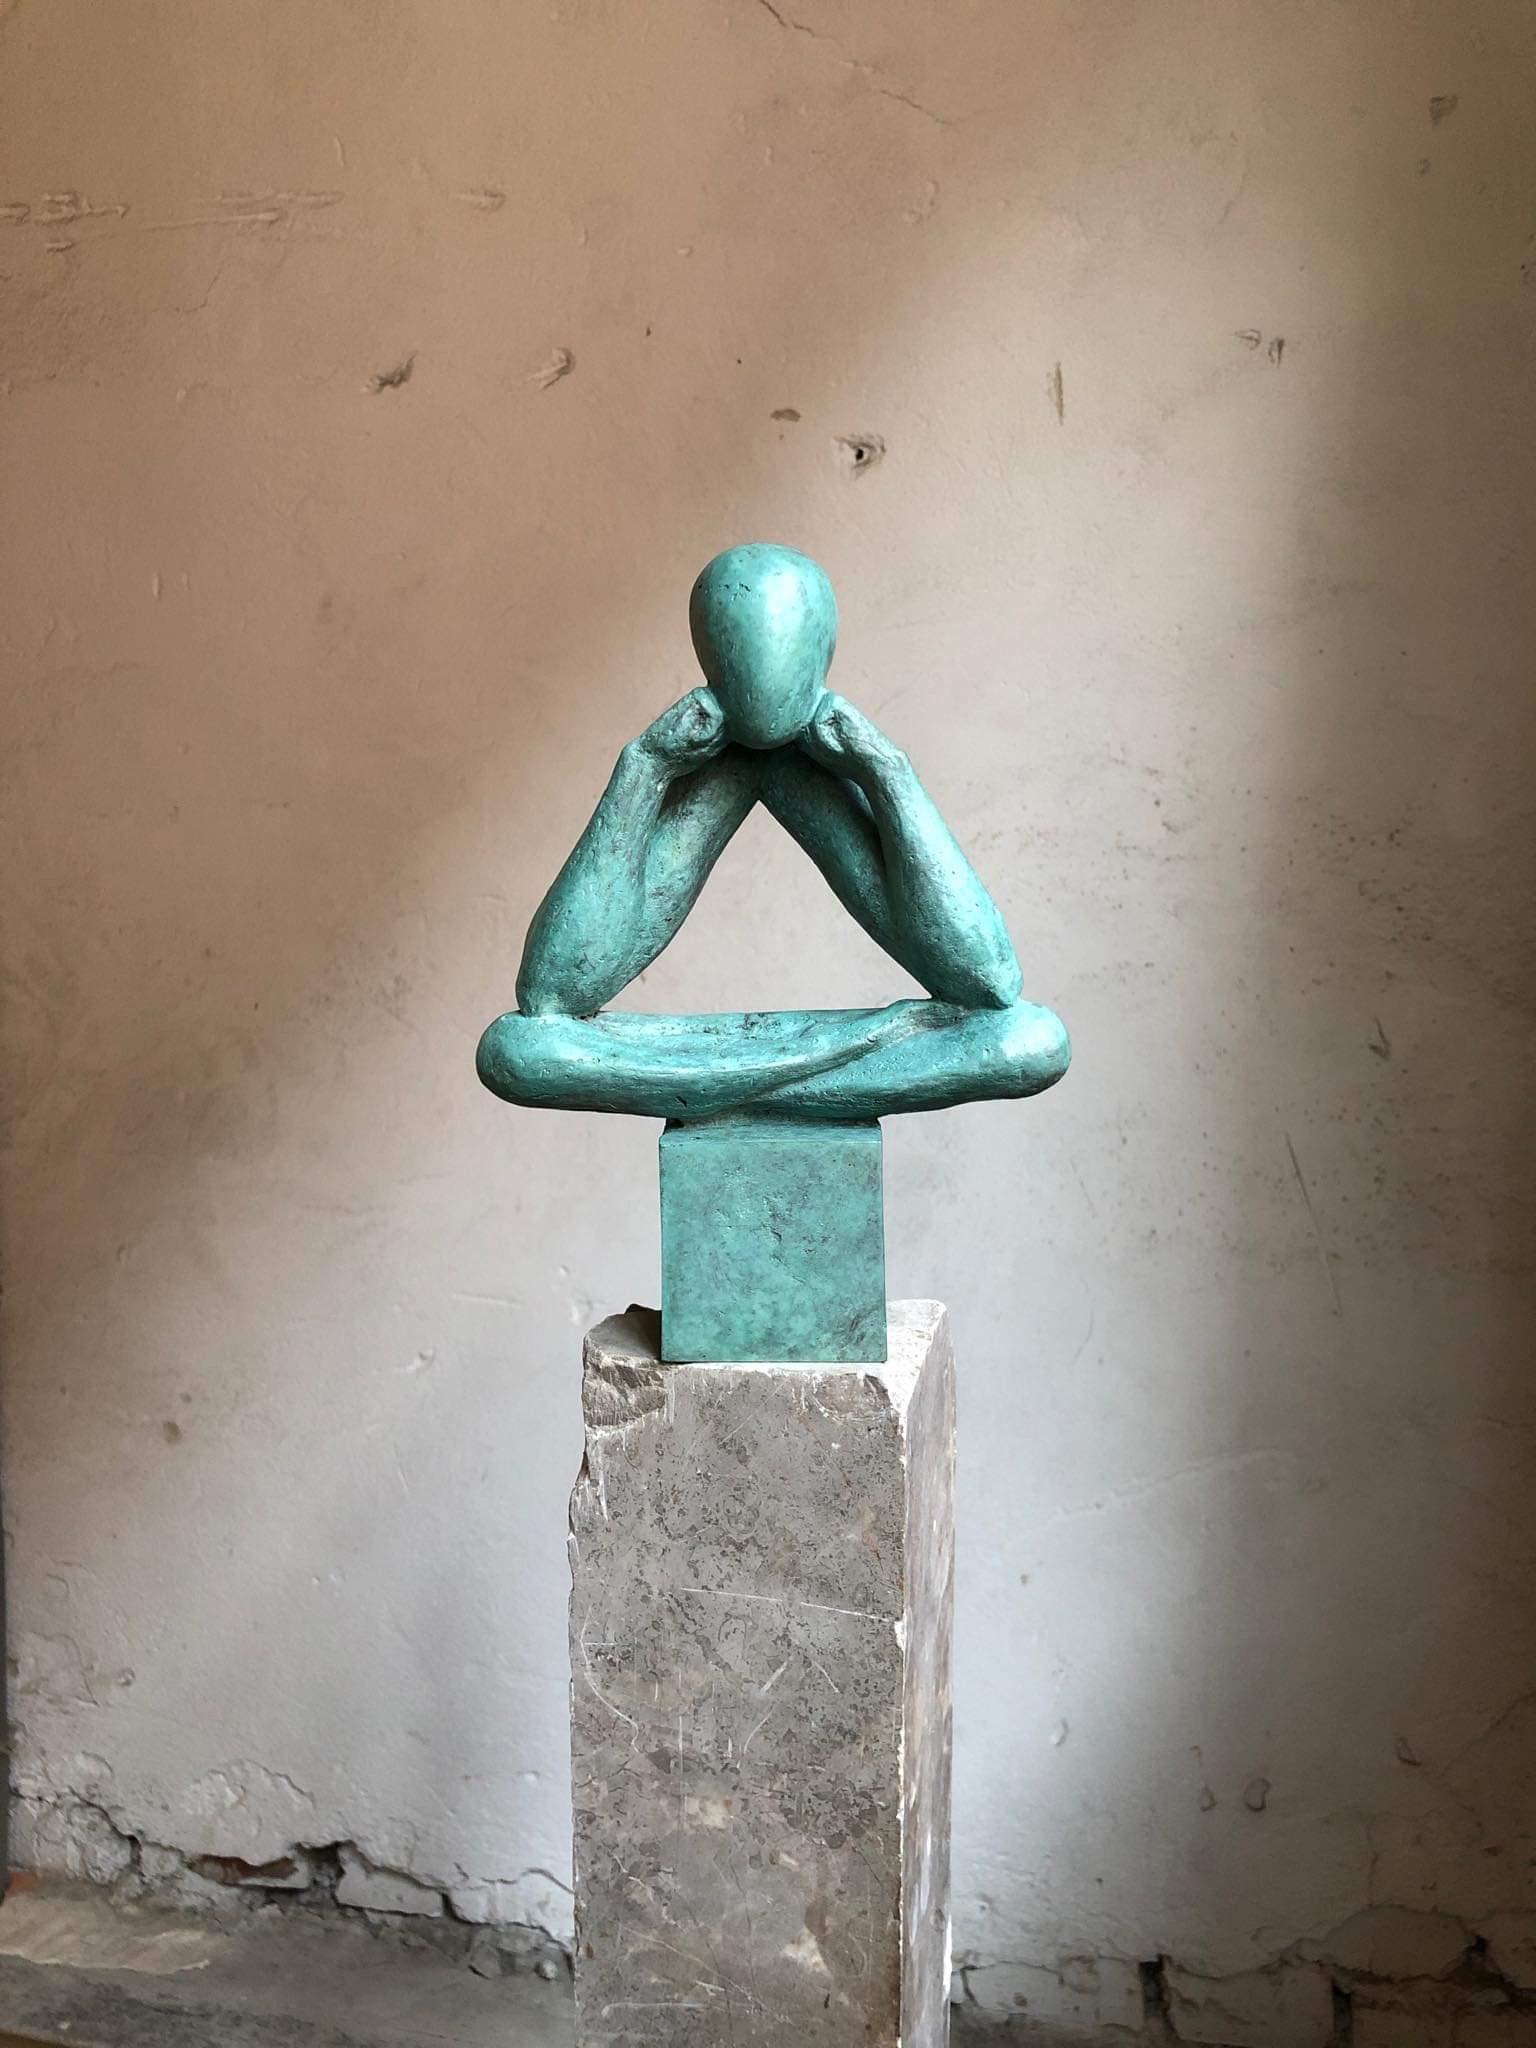 "The man without a rod C" Bronze Sculpture ed. of 5 by Sergii Shaulis

The artist spent almost ten years of his life in the making of this eight-piece series. It is an introspective representation of what he calls absolute hopelessness. “It's about